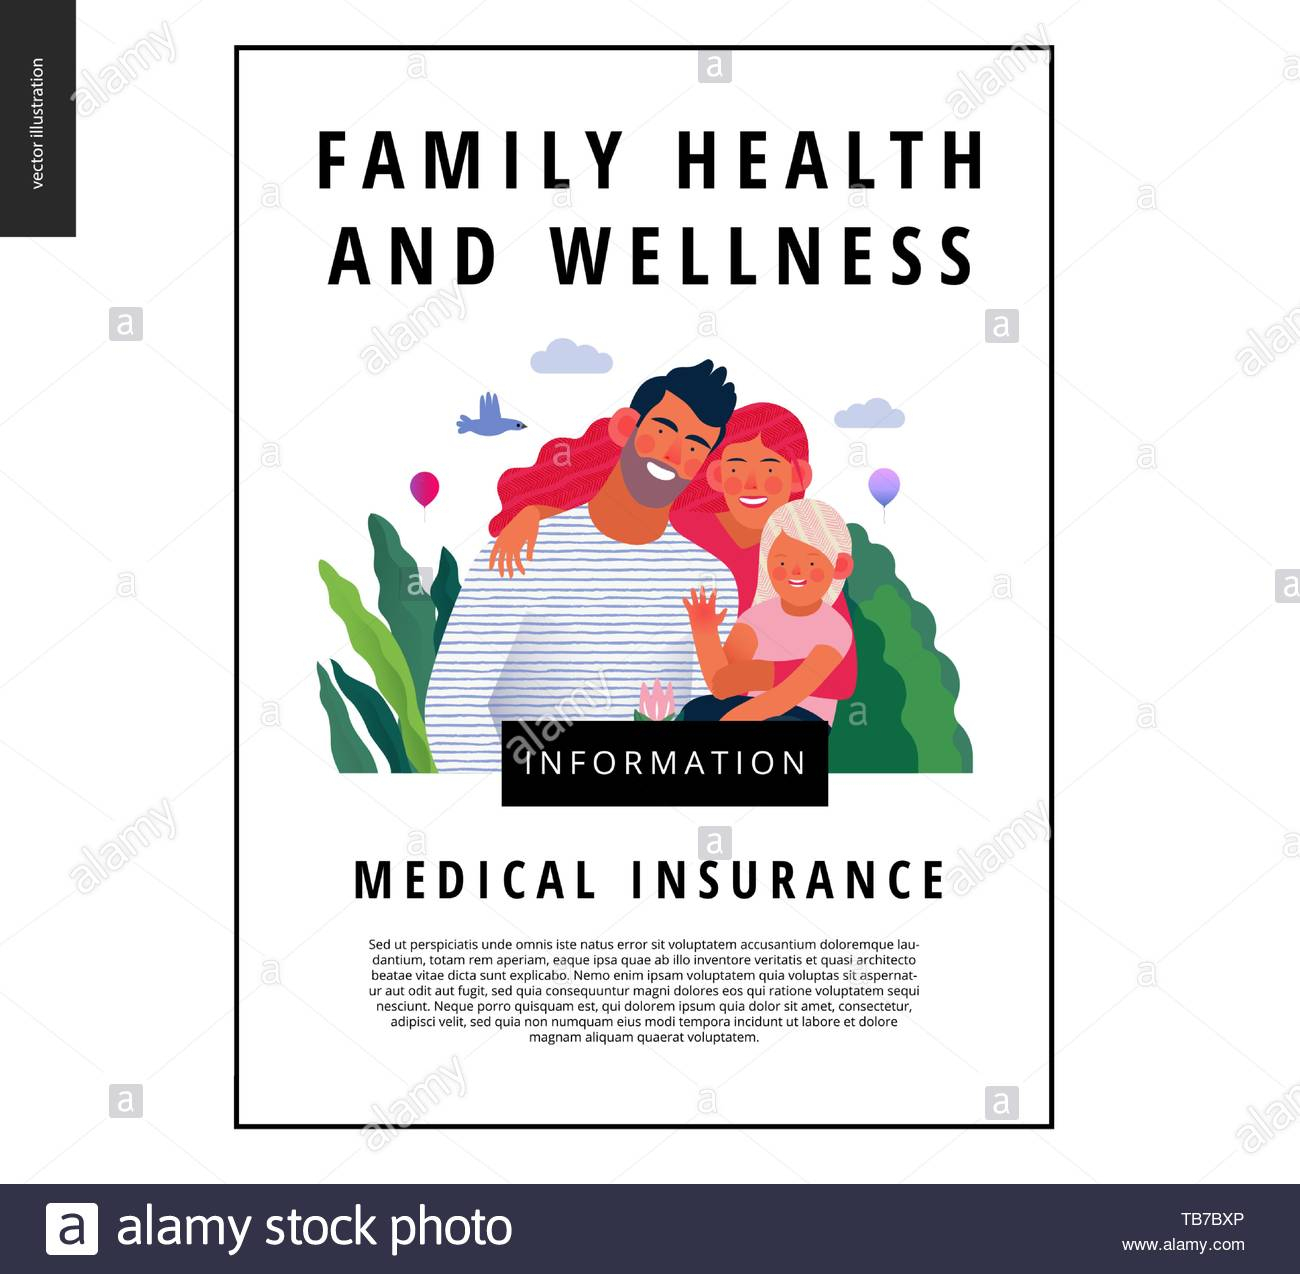 Medical Insurance Template  Family Health And Wellness Inside Health And Wellness Flyer Template